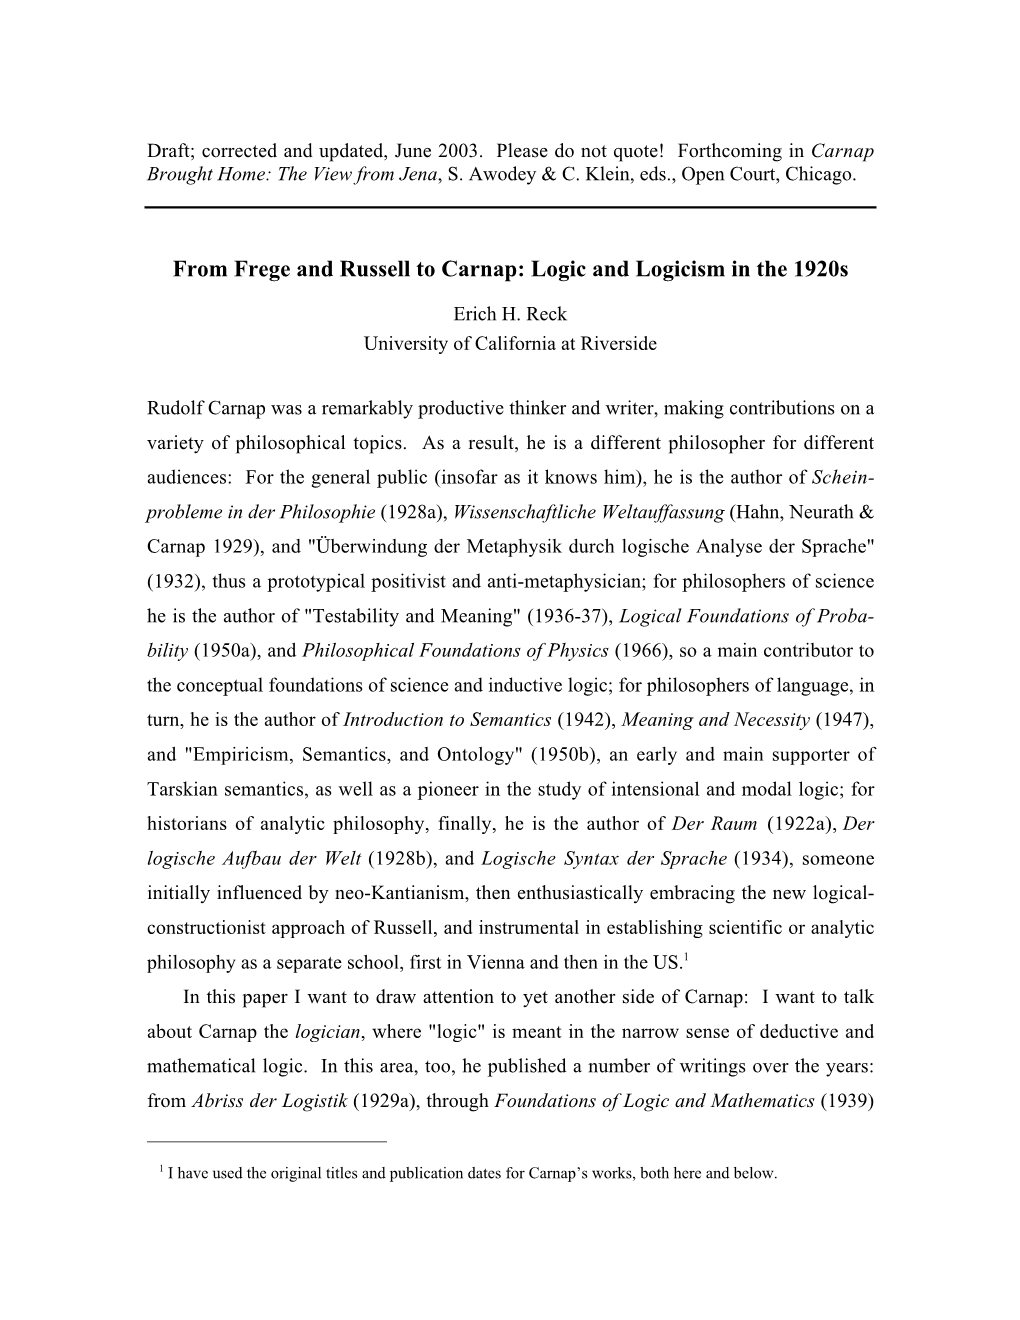 From Frege and Russell to Carnap: Logic and Logicism in the 1920S